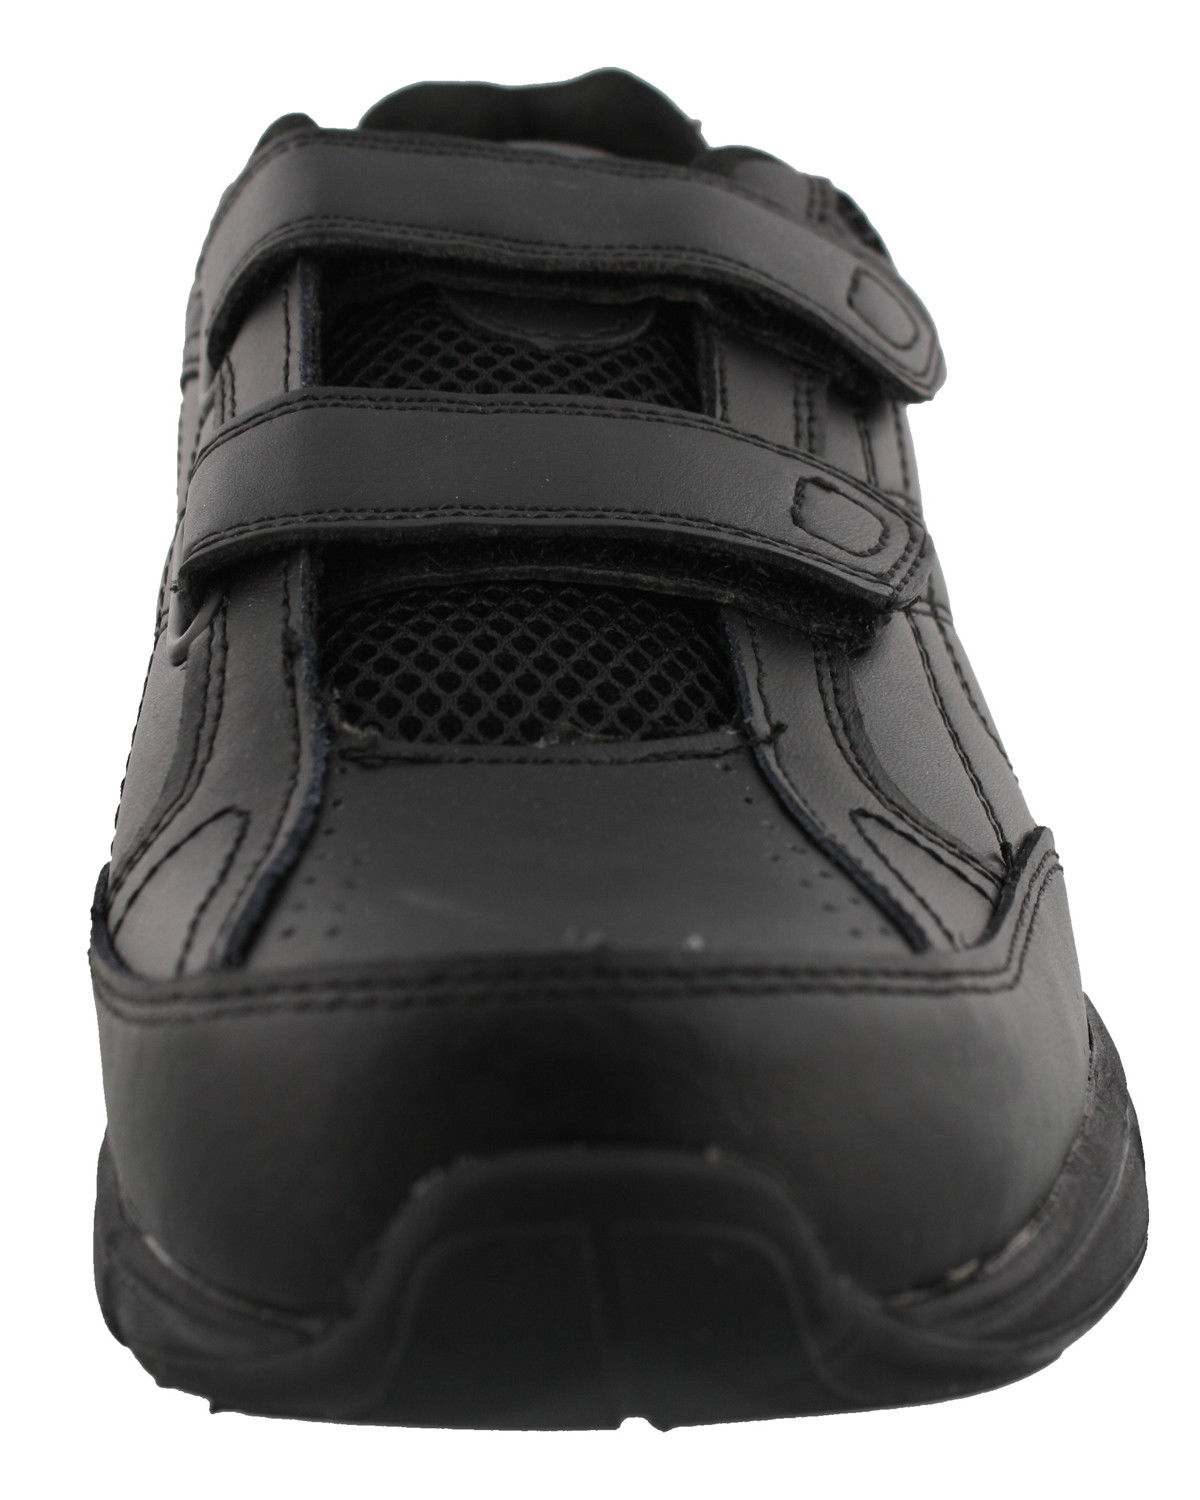 Dr. Scholl's Men's Brisk Sneakers (Wide Width Available) - image 2 of 5